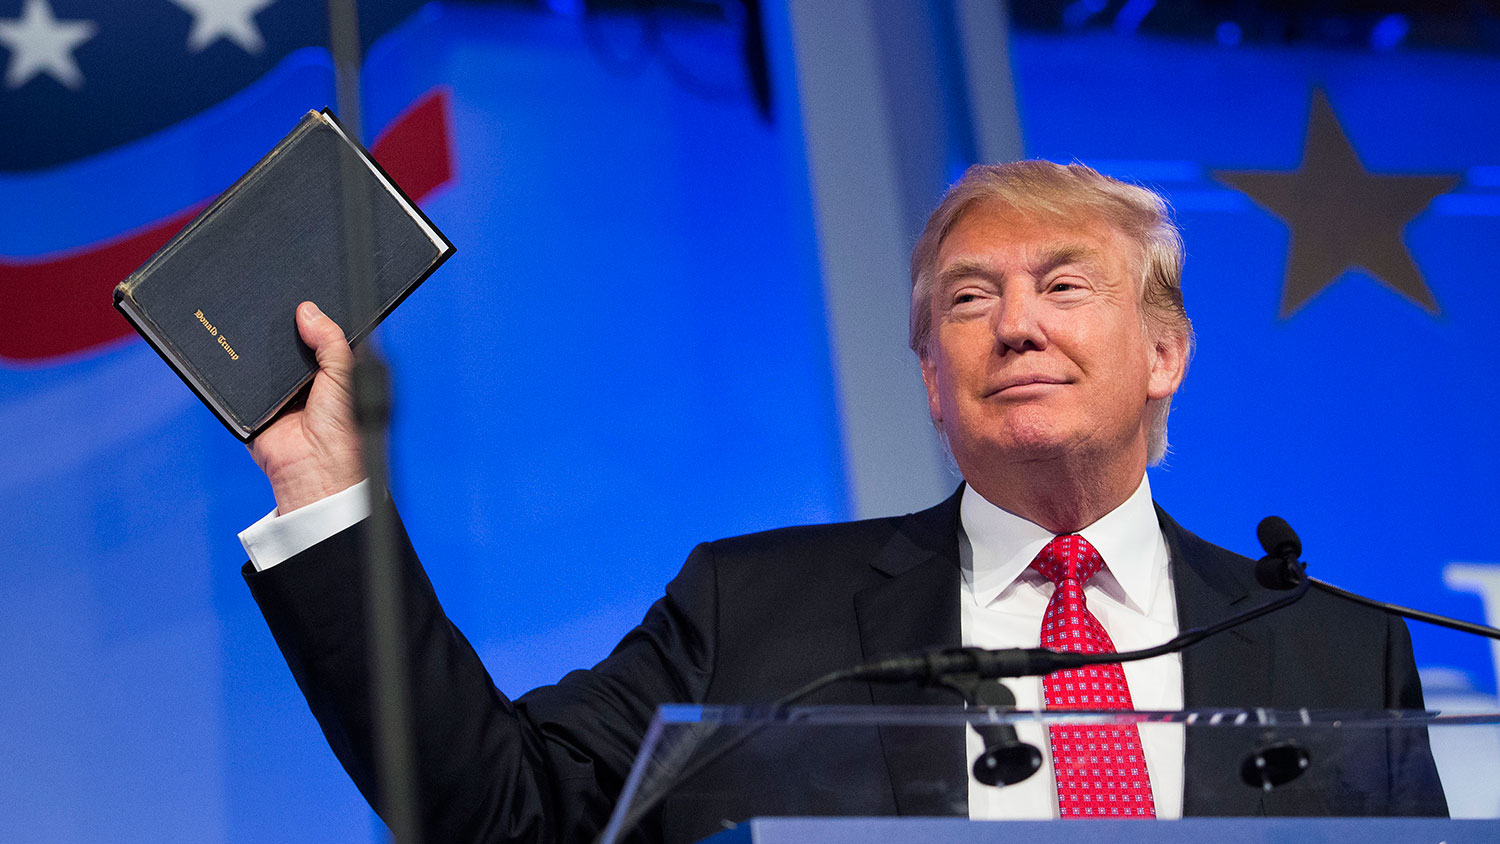 Donald Trump holds up a Bible while speaking at the Values Voter Summit in Washington on Sept. 25, 2015.
